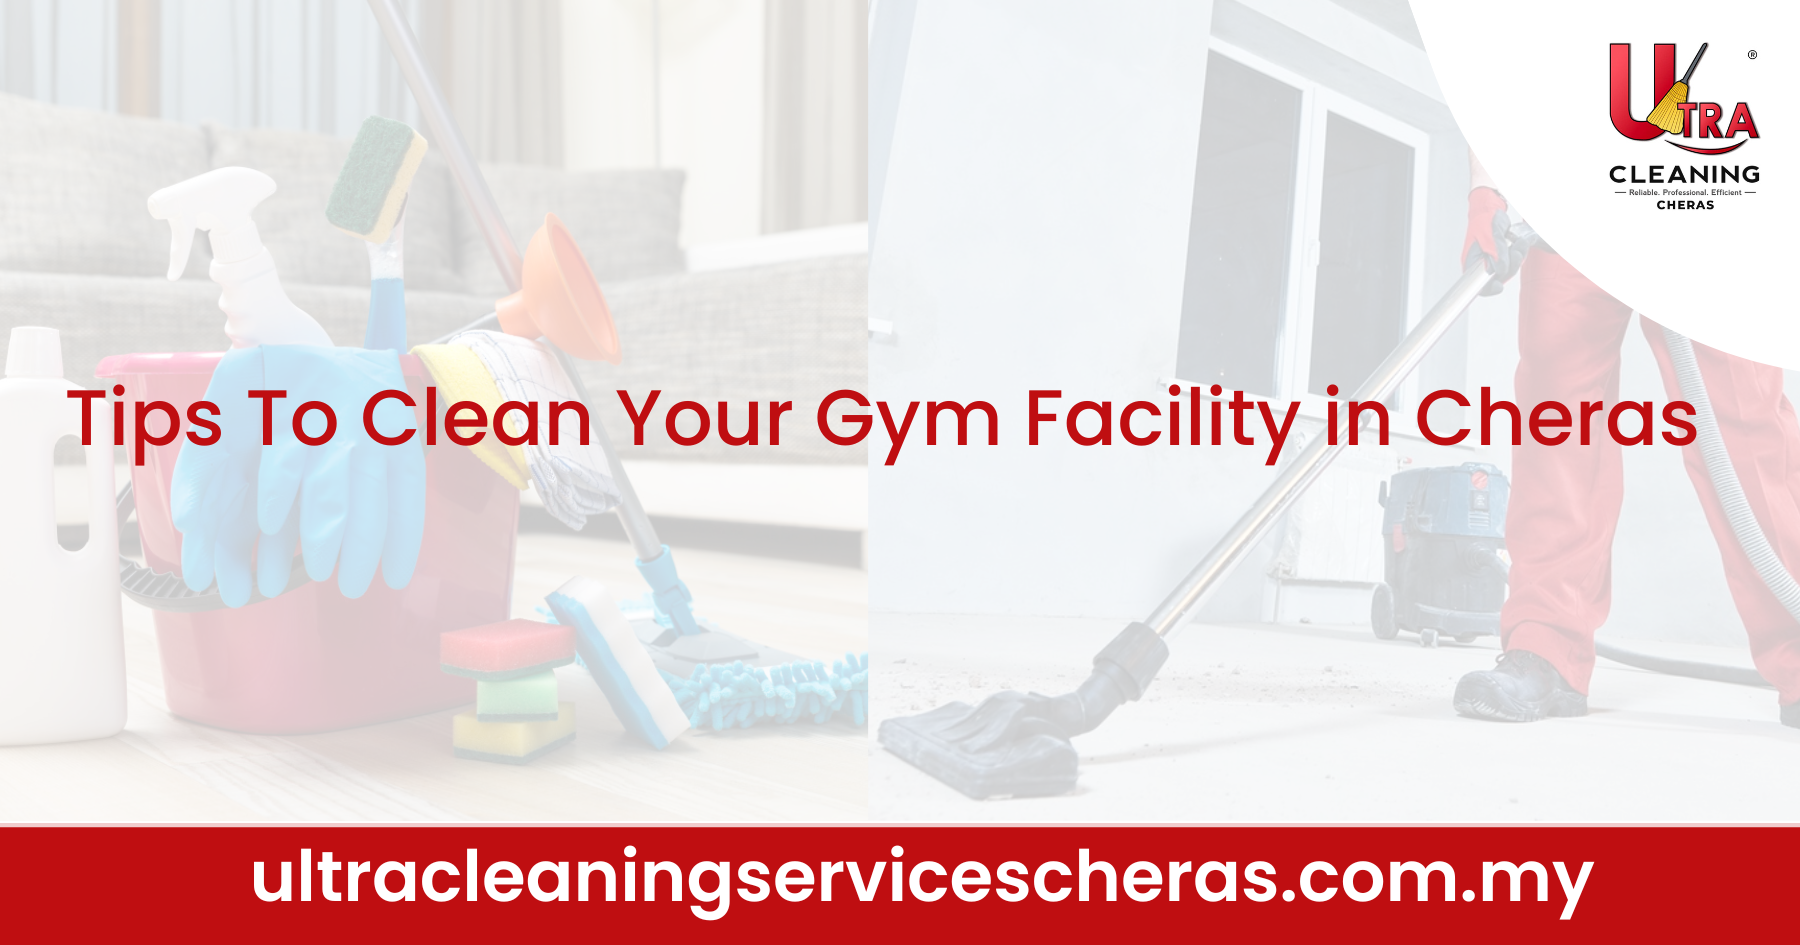 Tips To Clean Your Gym Facility in Cheras